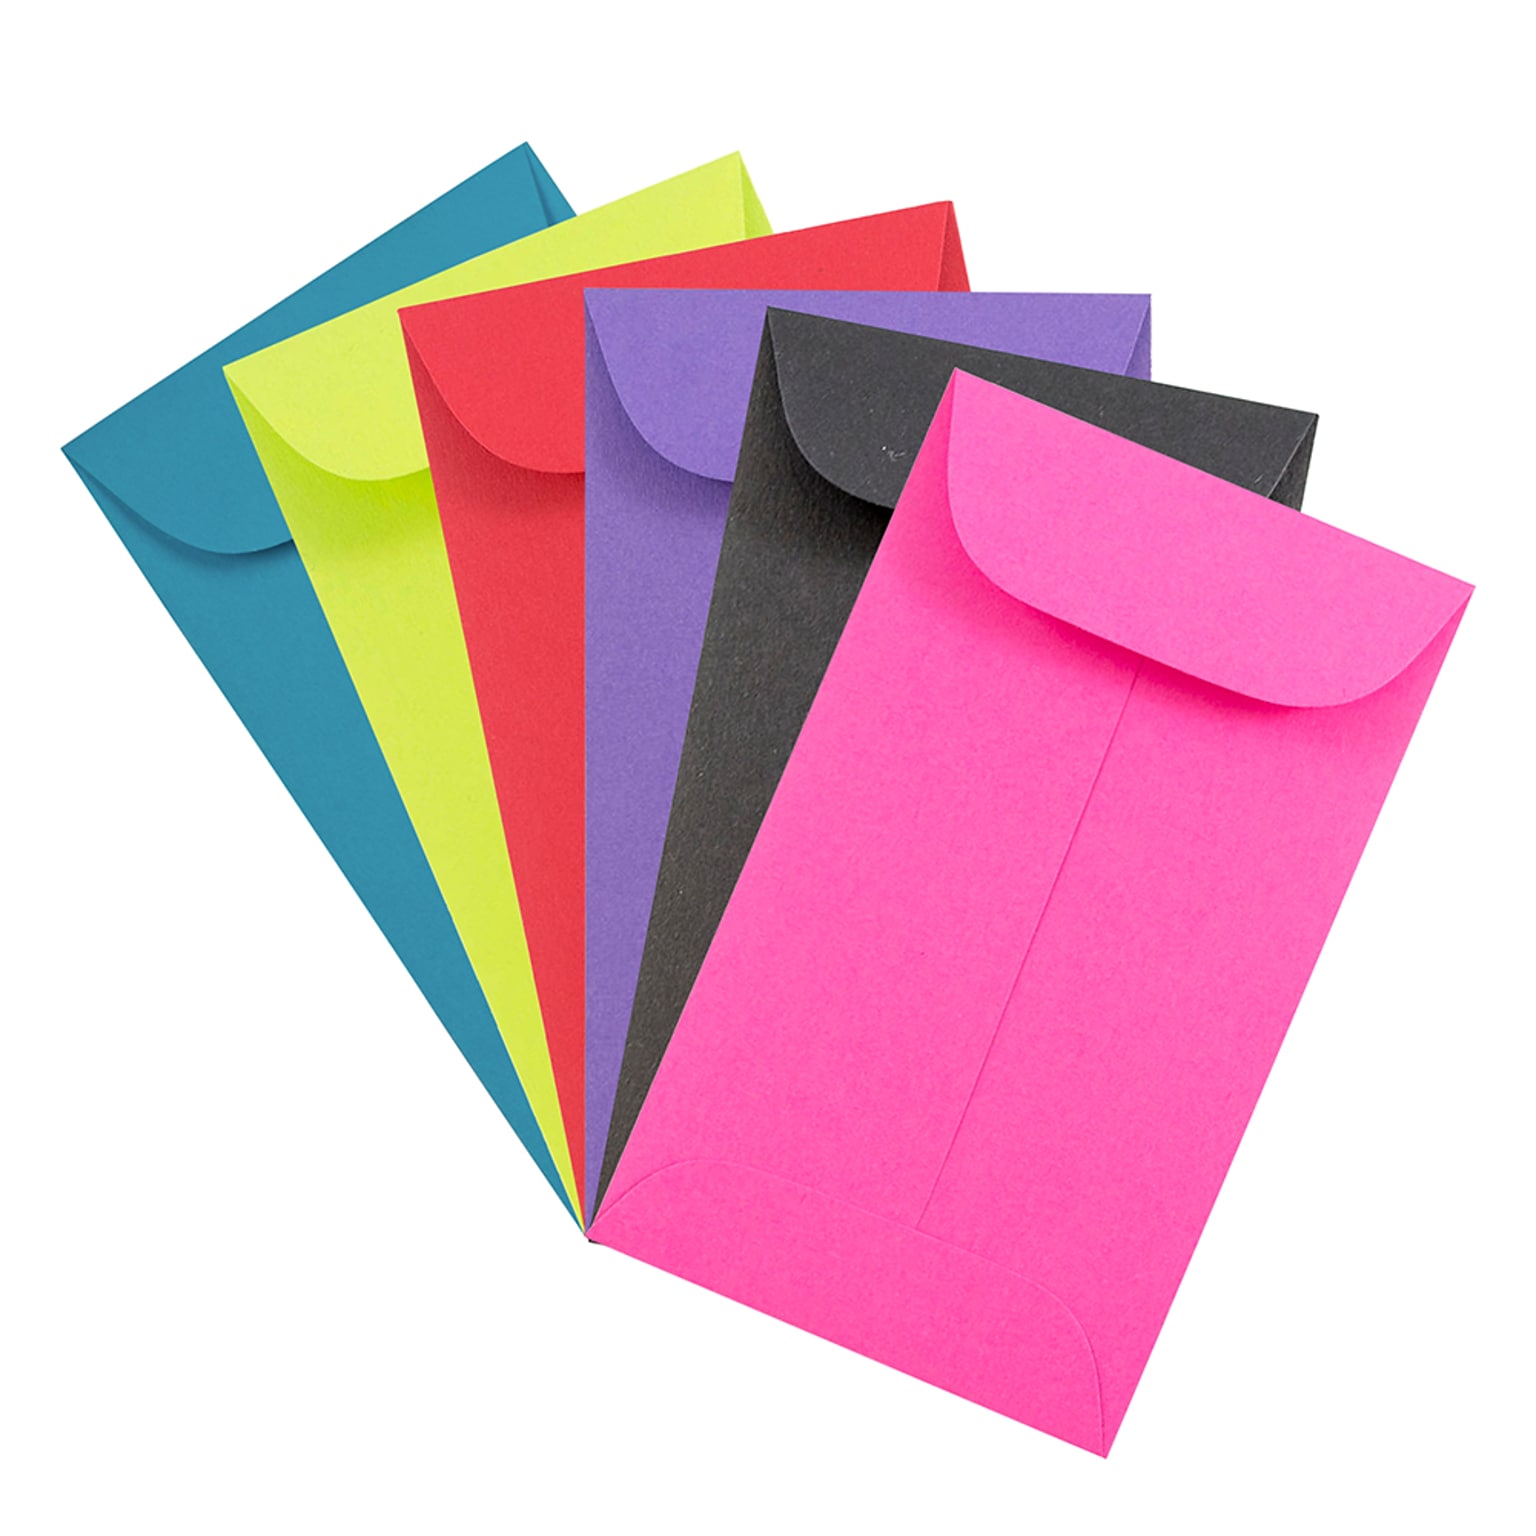 JAM Paper® #3 Coin Business Colored Envelopes, 2.5 x 4.25, Assorted Colors, 150/Pack (3567303assrt)